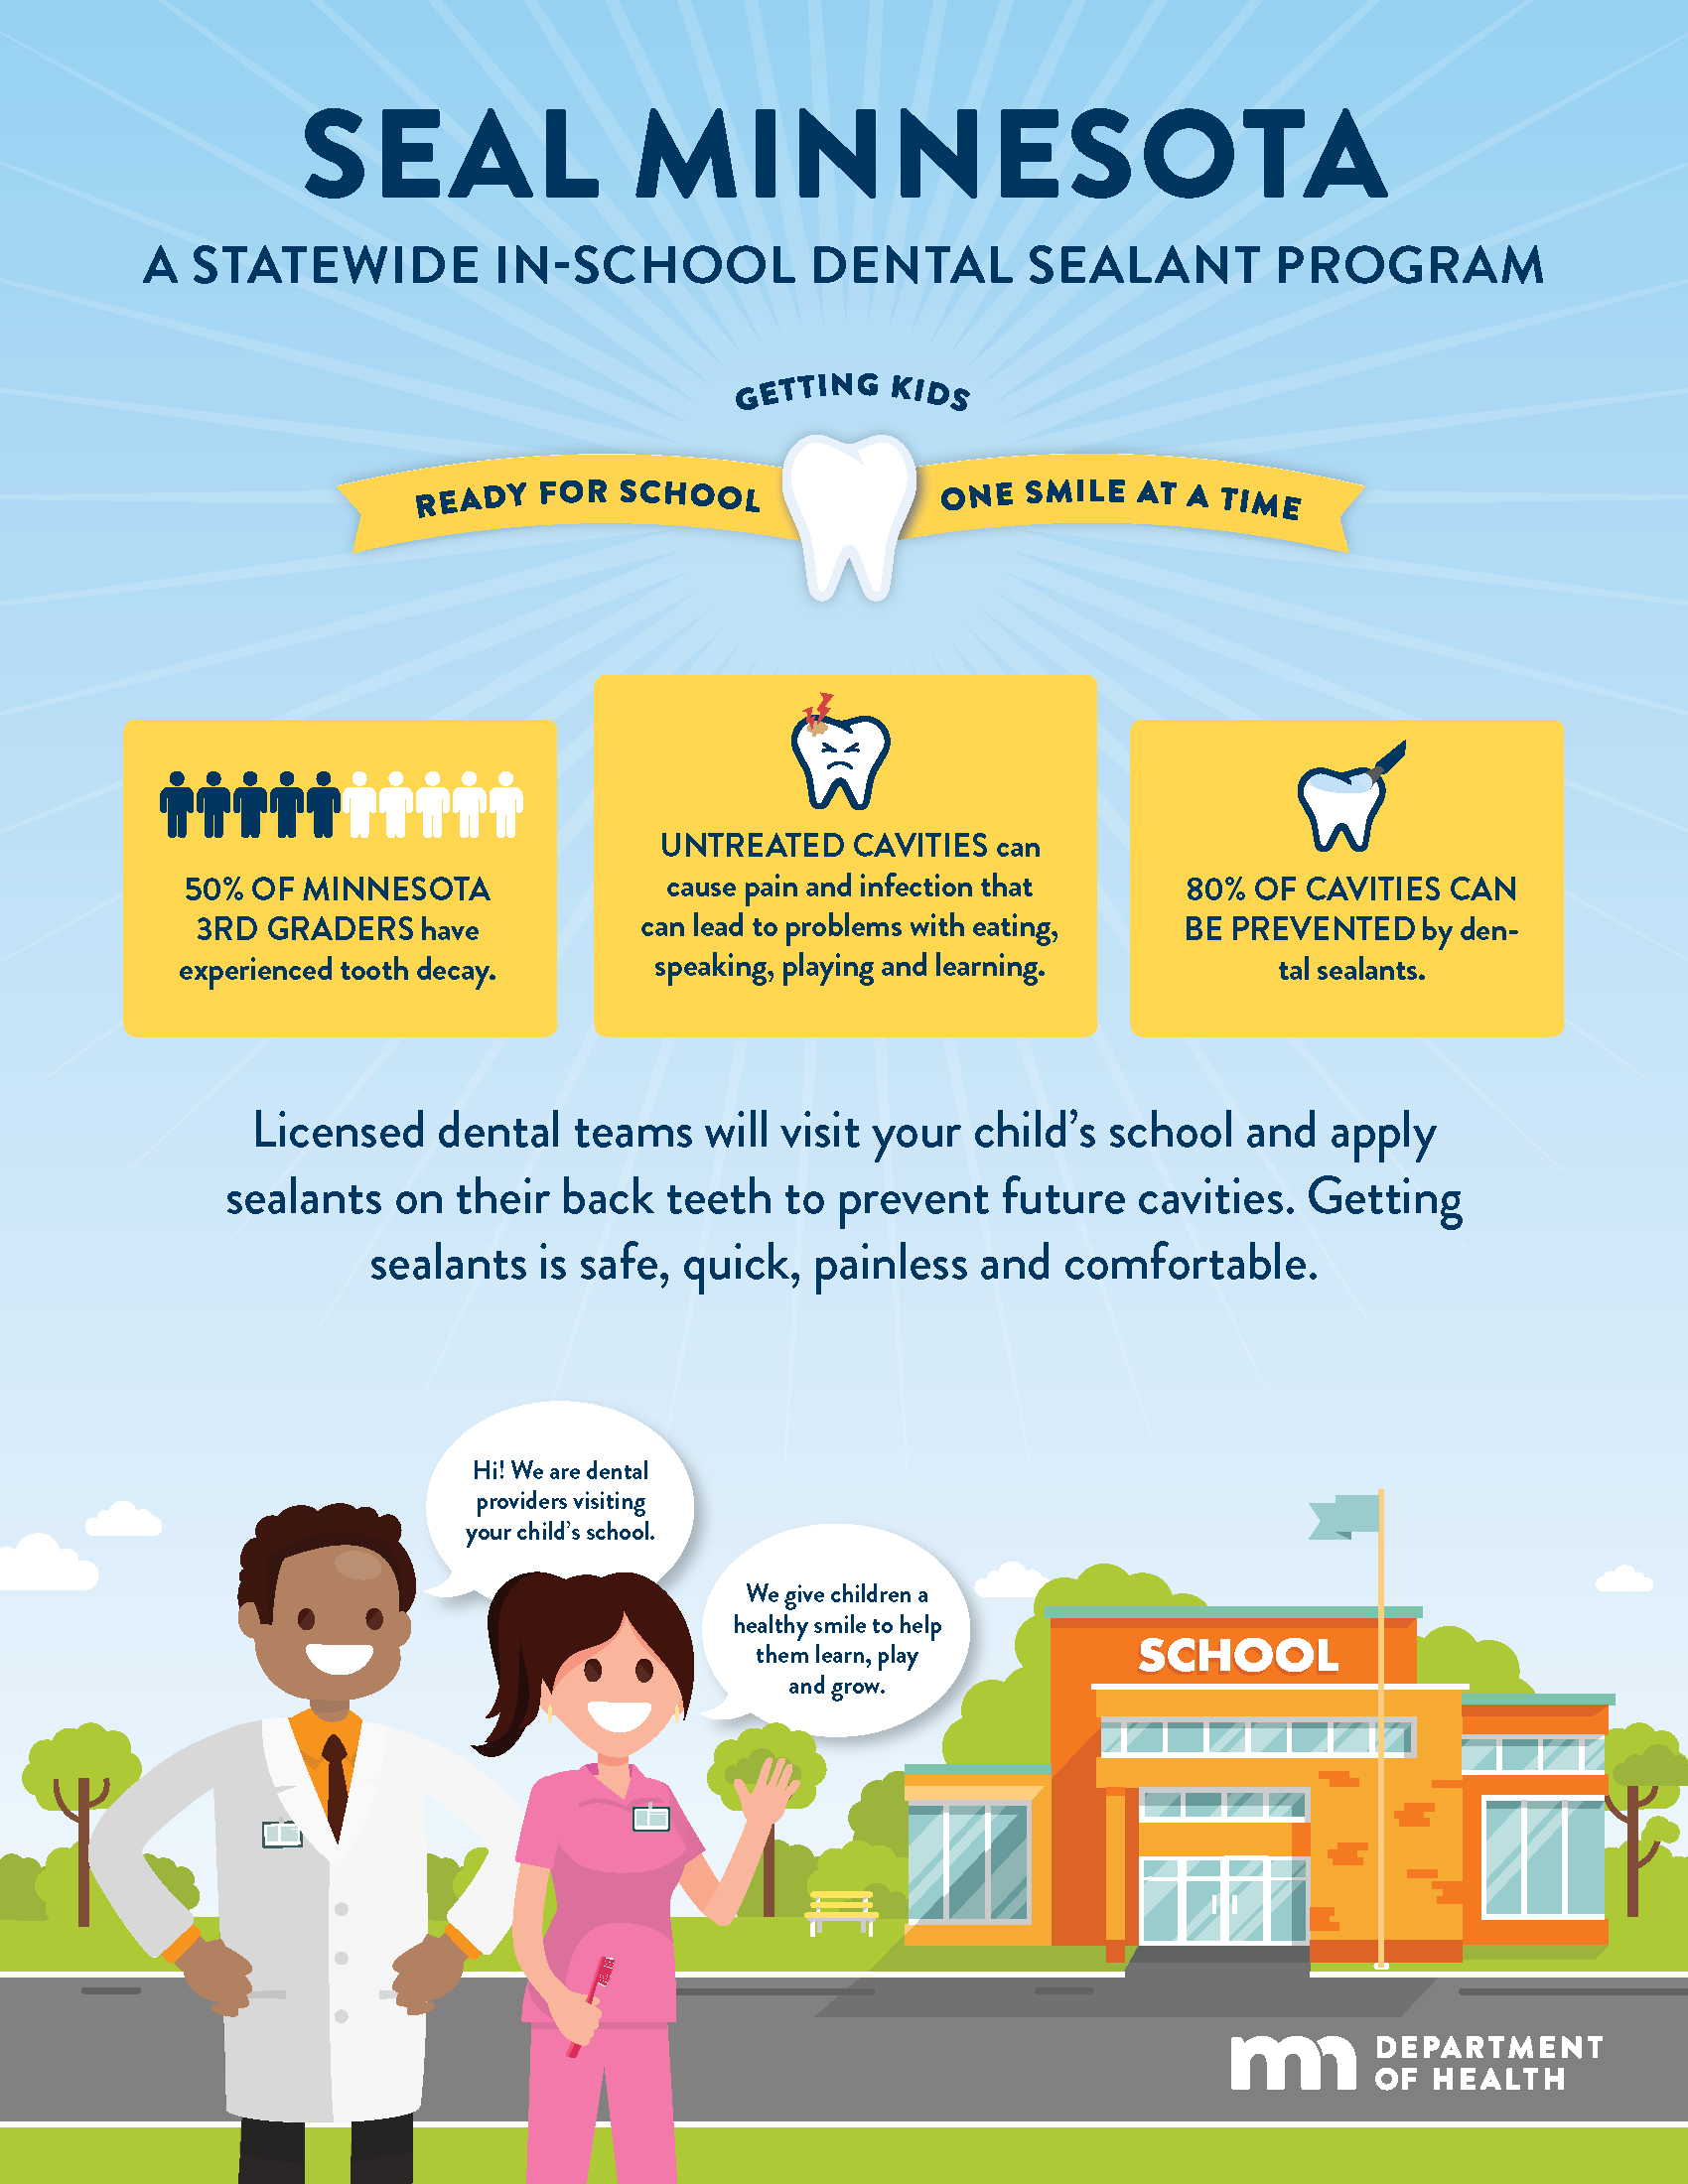 Card for parents about SEAL Minnesota Program and information on dental sealants application process, and ways to prevent dental decay.